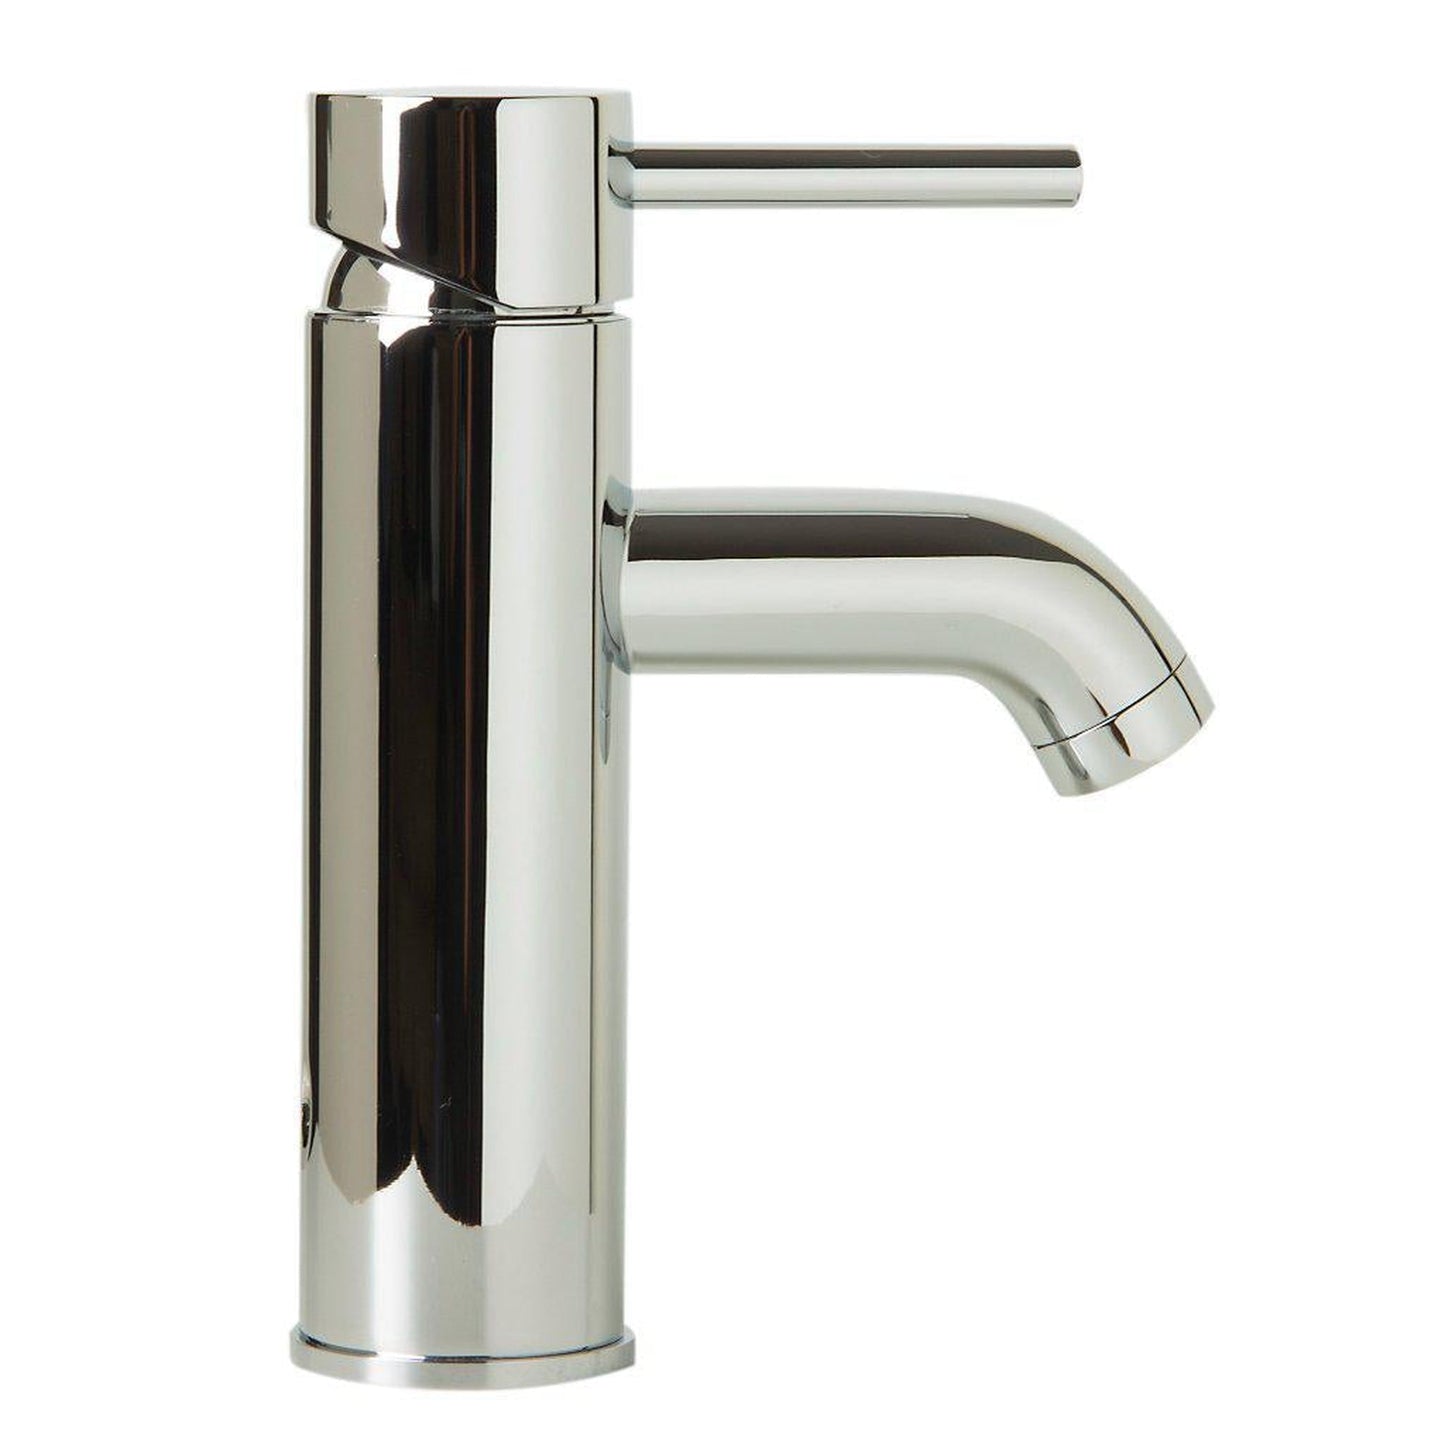 ALFI Brand AB1433-PC Polished Chrome Single Hole Round Spout Brass Bathroom Sink Faucet With Single Lever